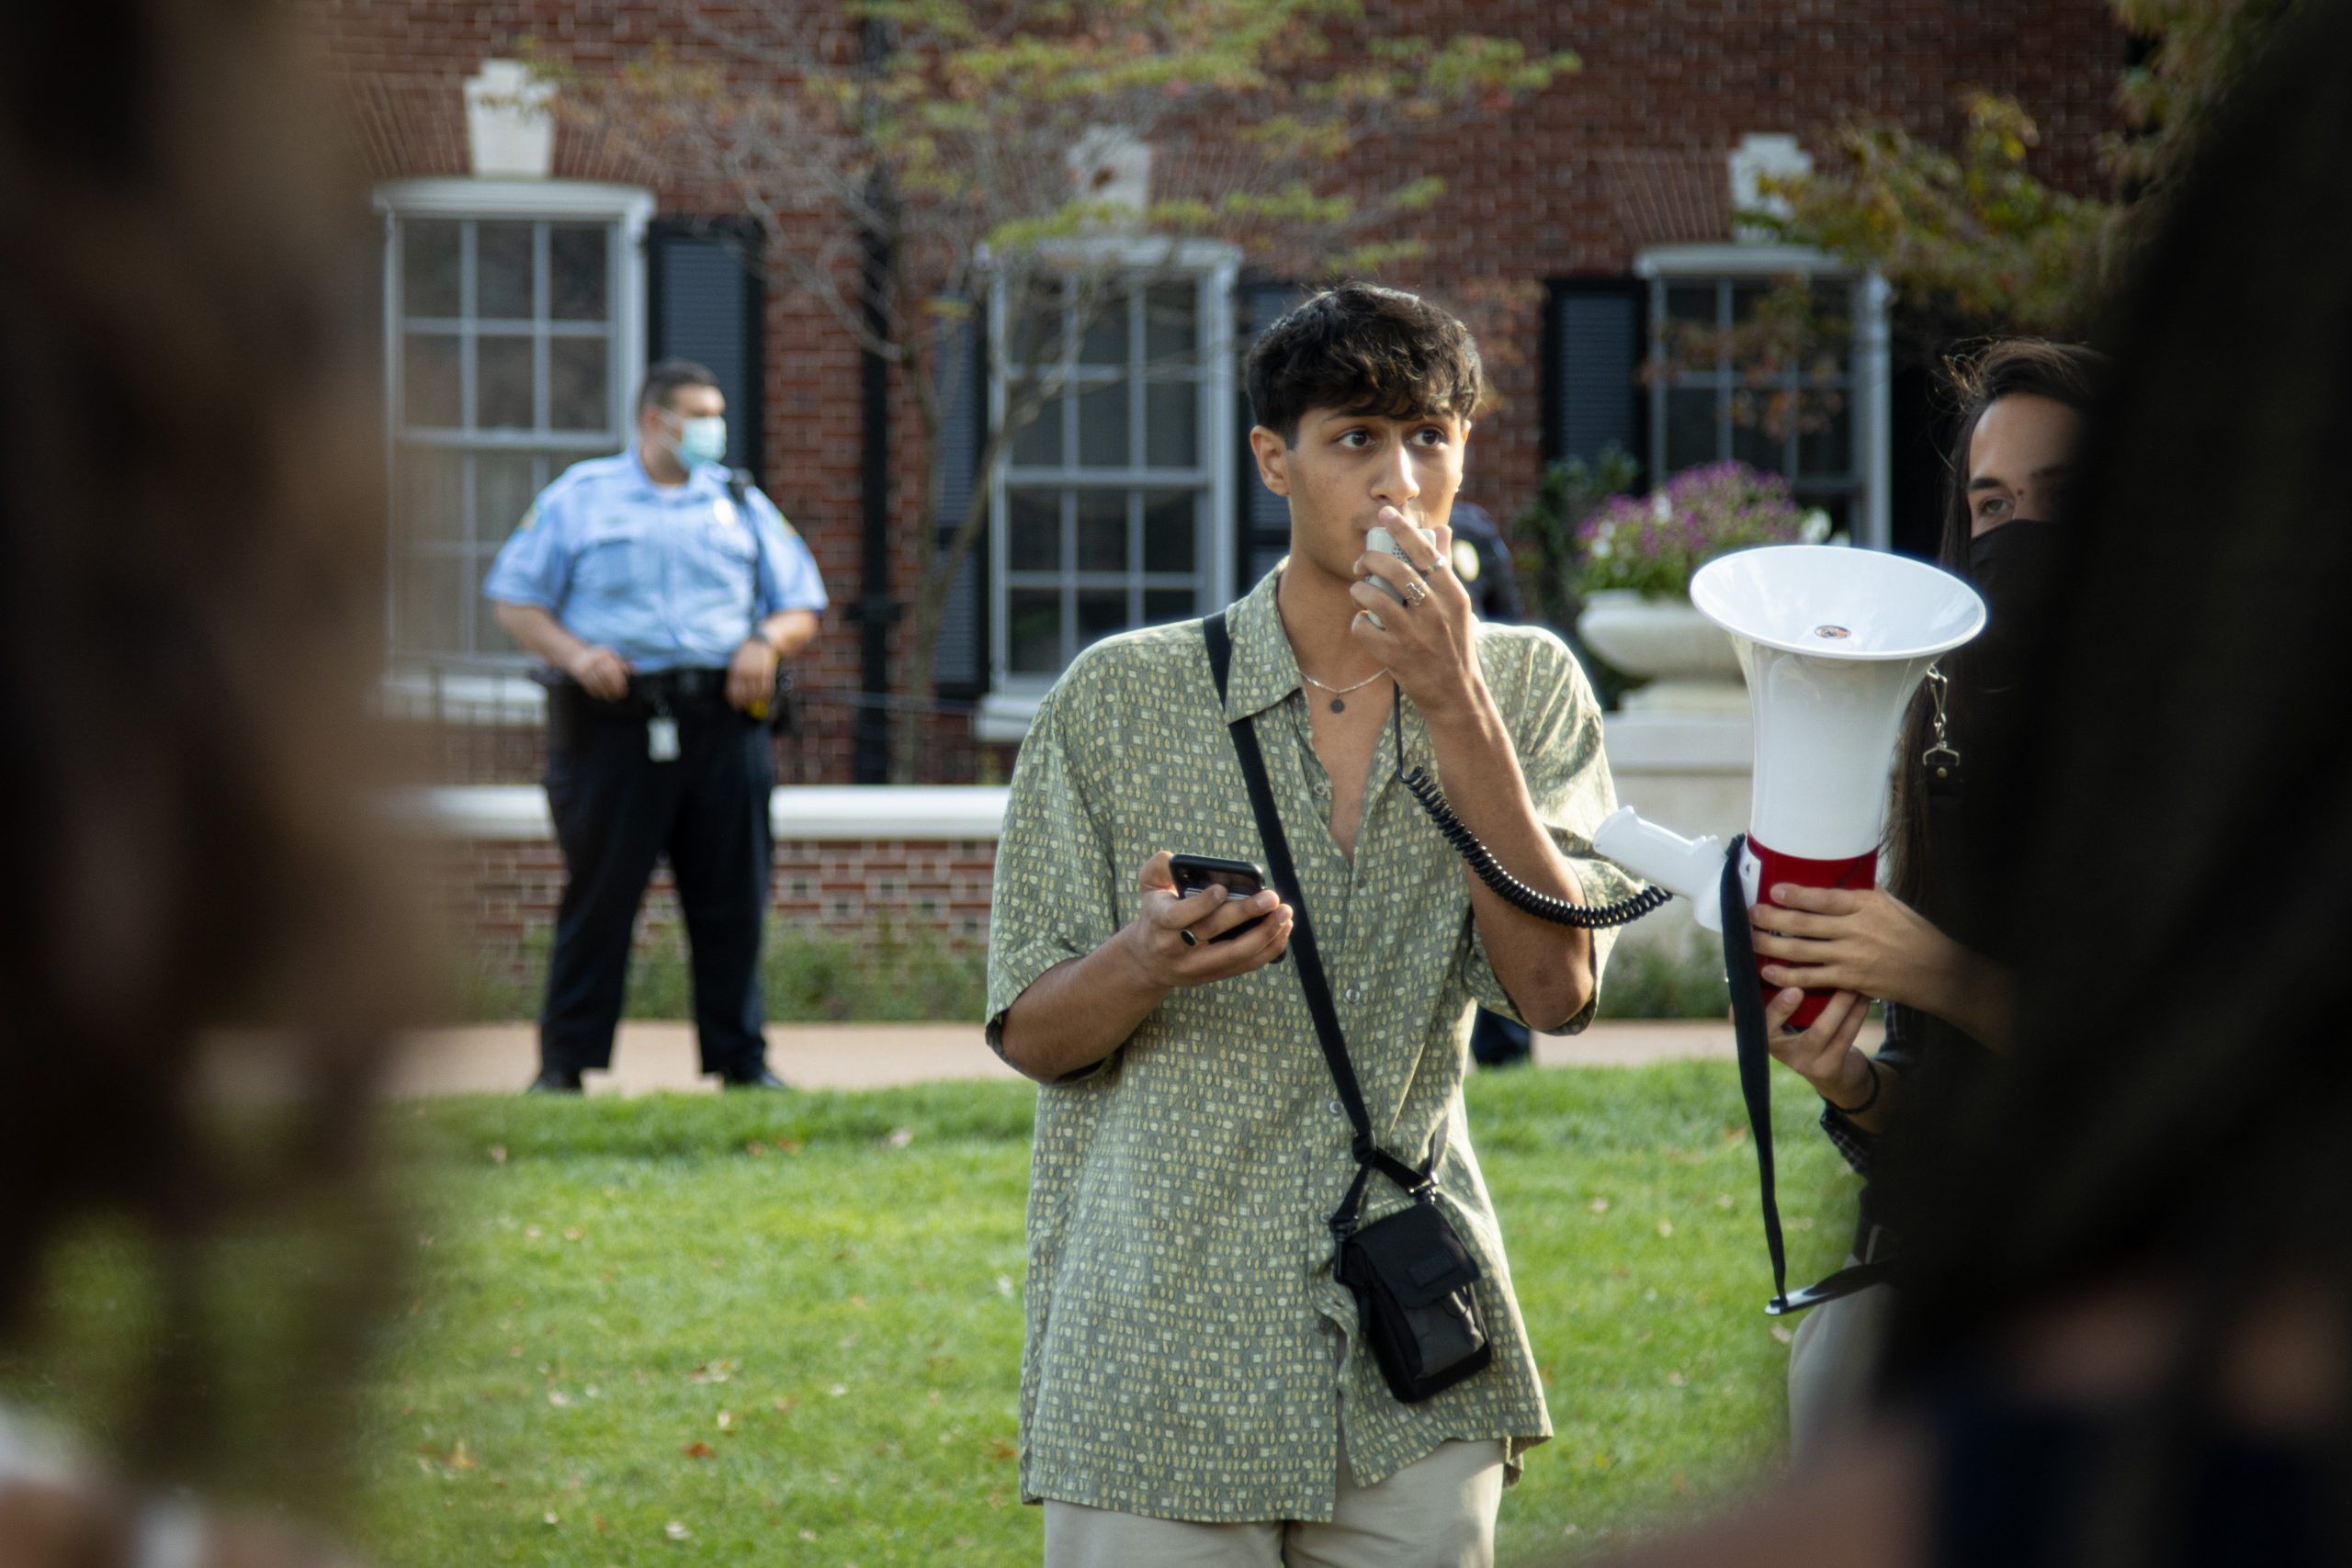 A student wearing a patterned green button shirt stands with a microphone in his left hand held up to his mouth, a phone in his right hand held near his chest and a black camera draped around his neck. A police officer in light blue shirt and black pants stands on the left in front of a brick building in the left of the background.